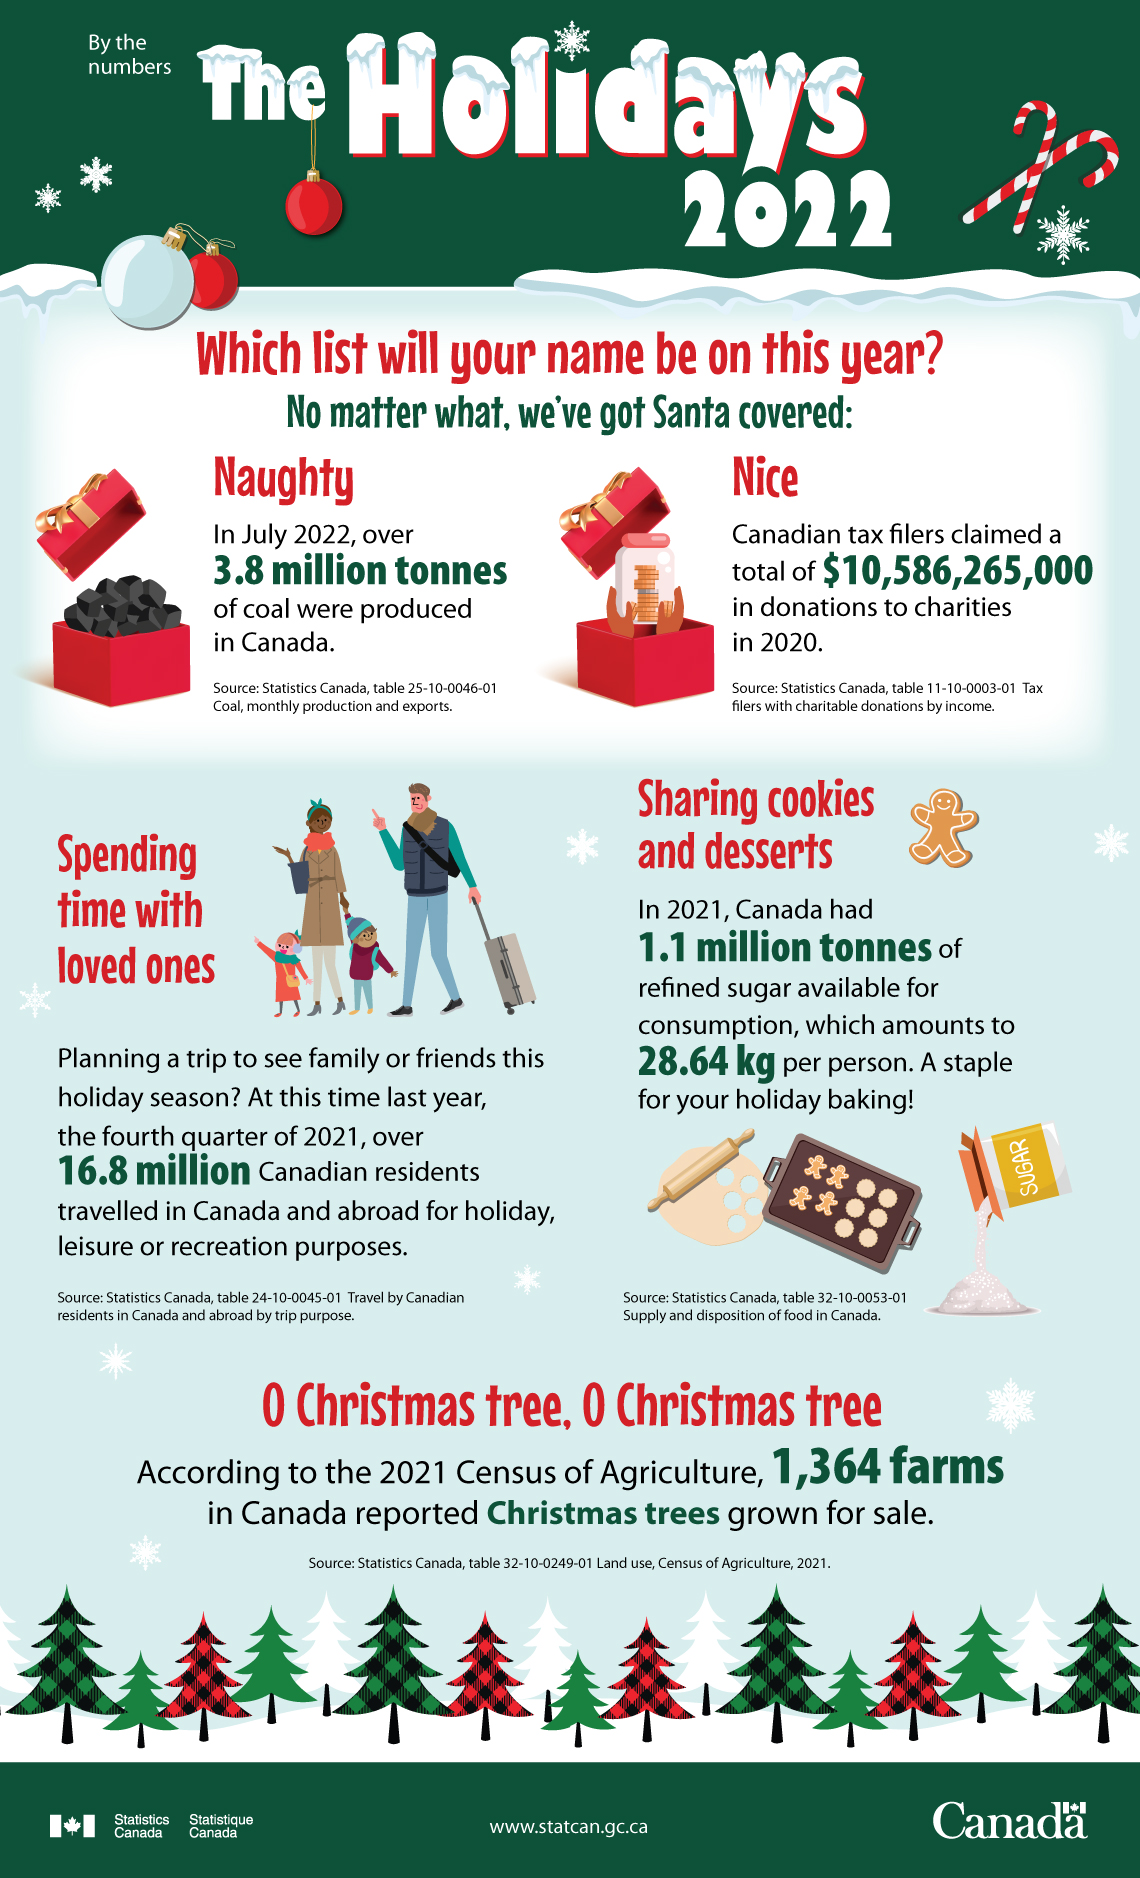 By the numbers - The Holidays, 2022